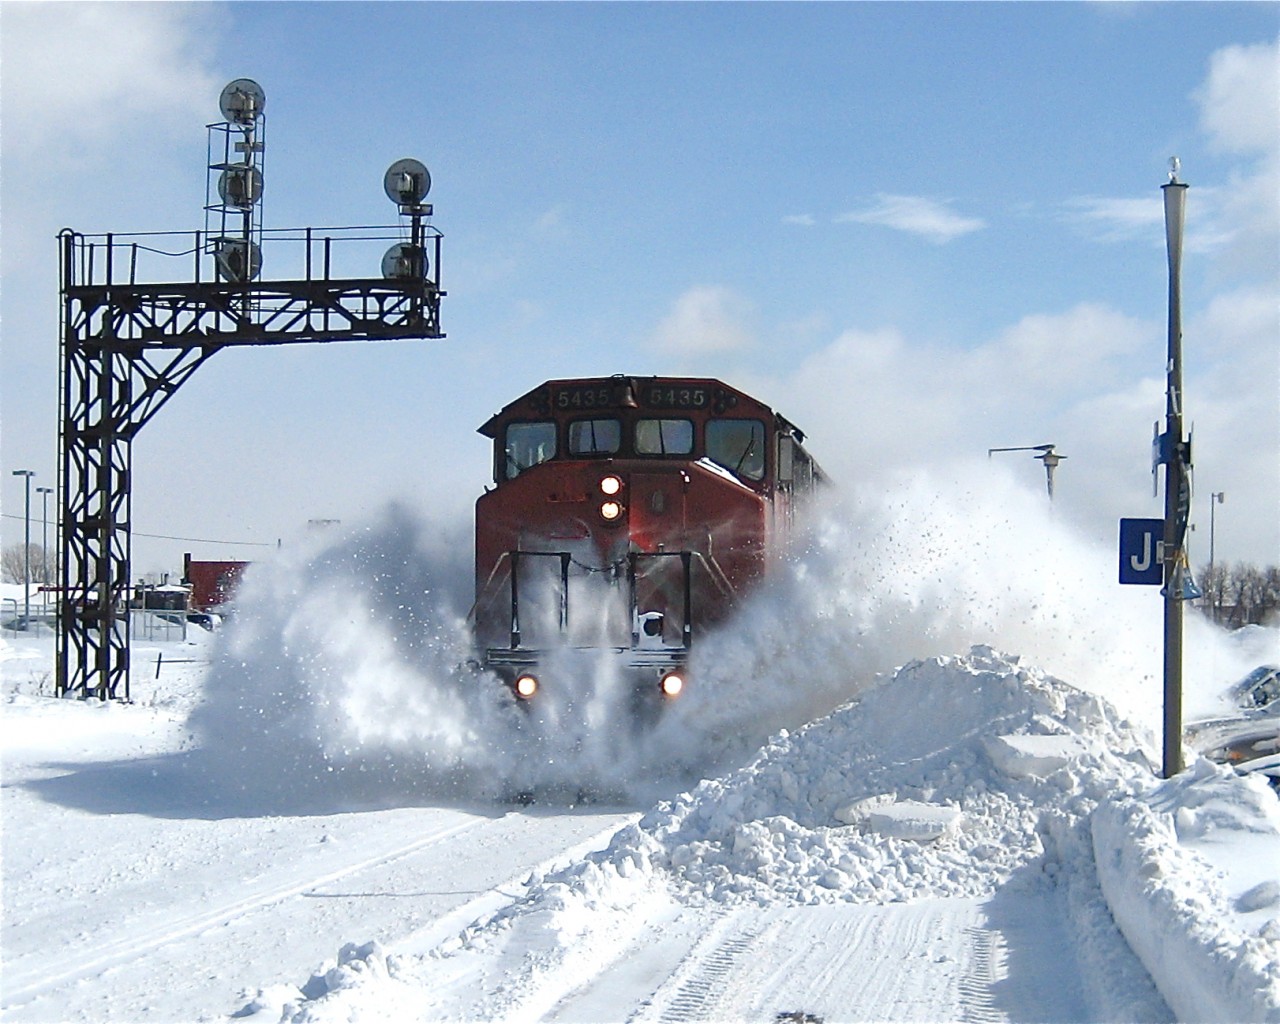 I was at the VIA Dorval Station on a crisp and clear Sunday morning the day after a massive snowstorm. Evidently a train had not passed on this track for sometime, and the lead engine (a now retired SD50F, CN 5435) left me absolutely covered in snow as it passed. Don't ask me what the trailing unit(s) were! For more train photos, check out http://www.flickr.com/photos/mtlwestrailfan/